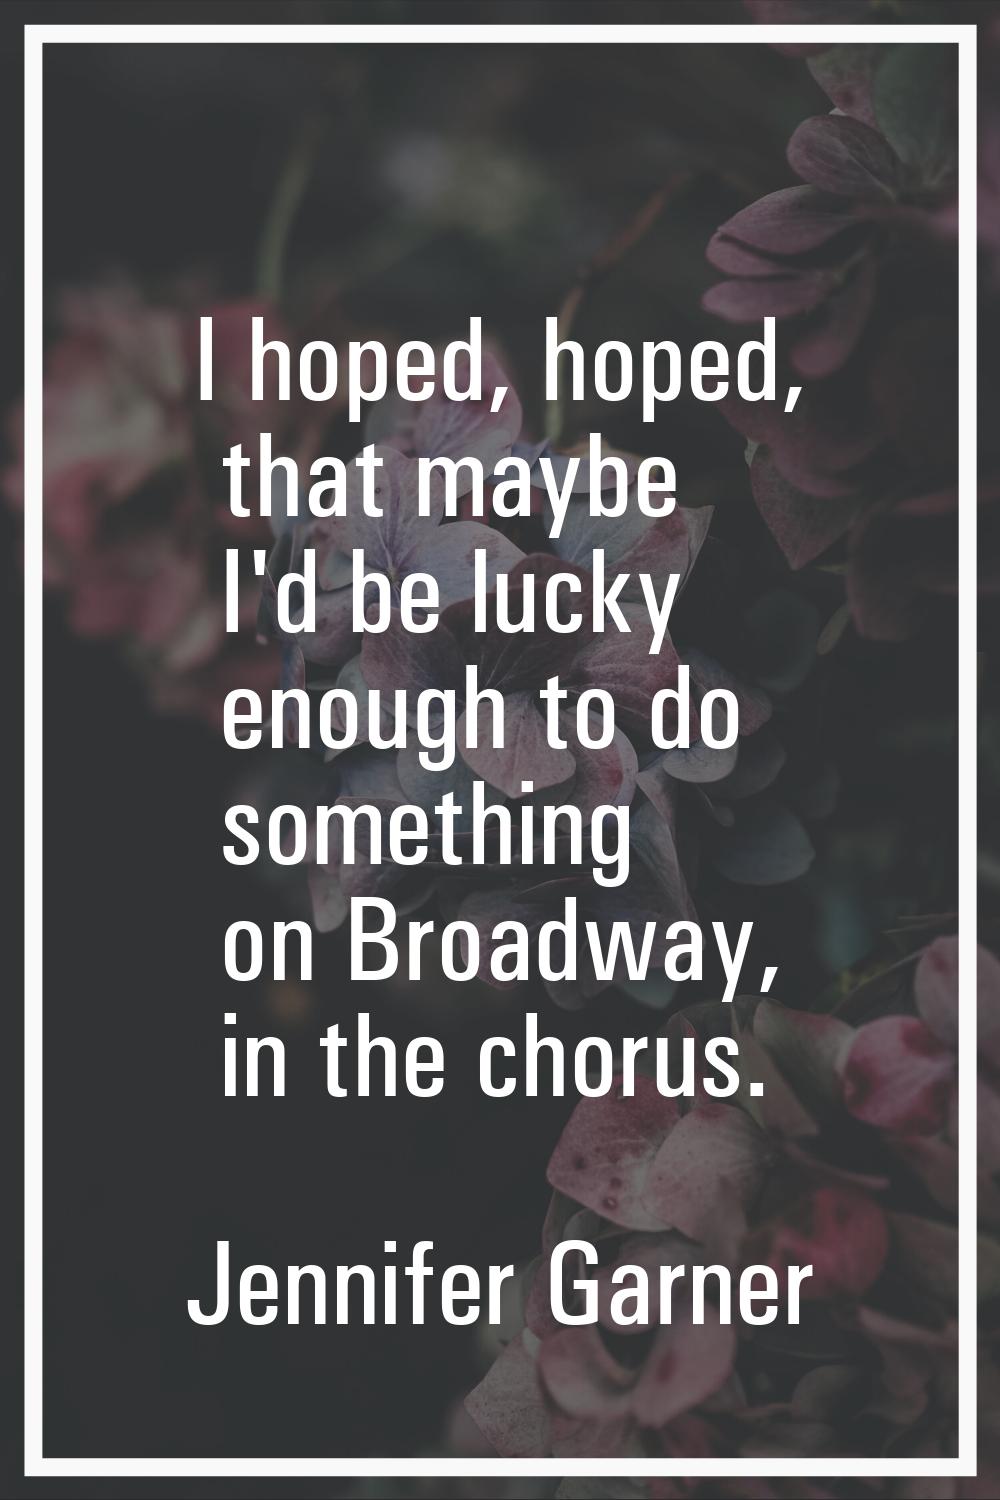 I hoped, hoped, that maybe I'd be lucky enough to do something on Broadway, in the chorus.